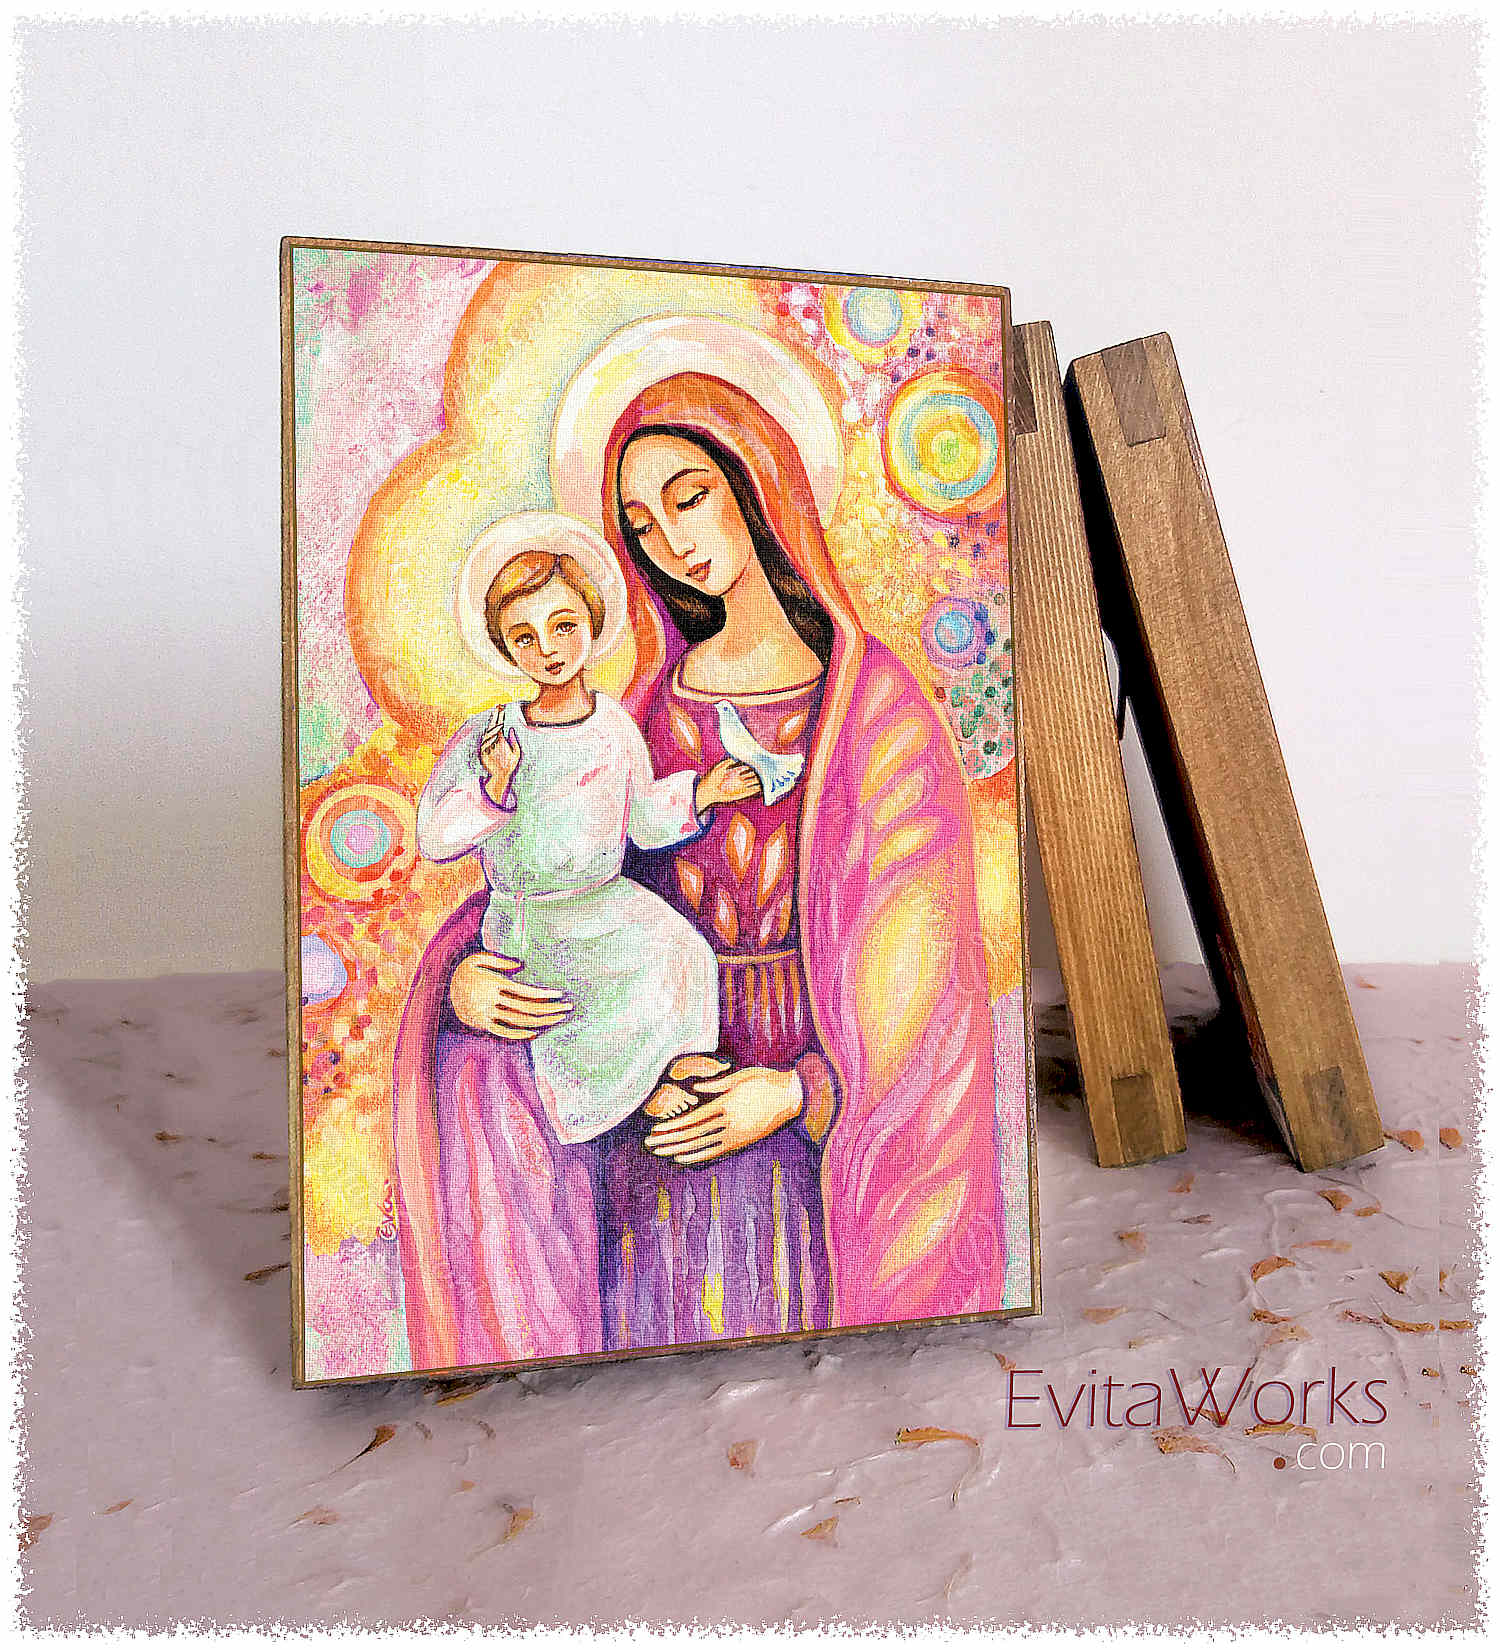 Hit to learn about "Blessing from Light, Madonna and Child" on woodblocks